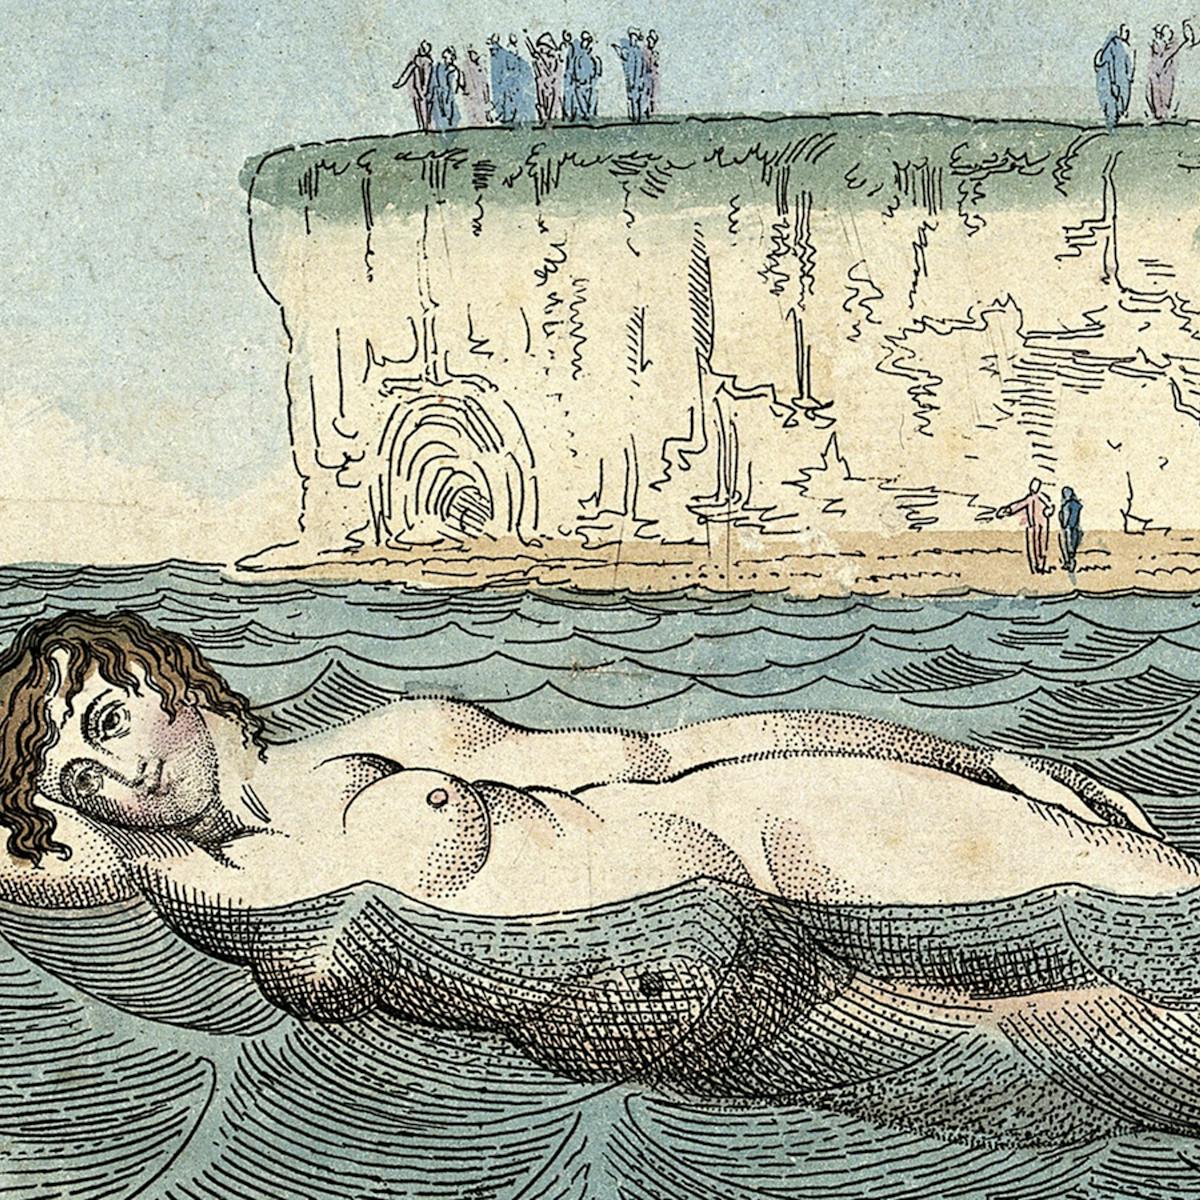 Drawing of a naked woman swimming in the sea, as distant figures stand on a cliff in the background